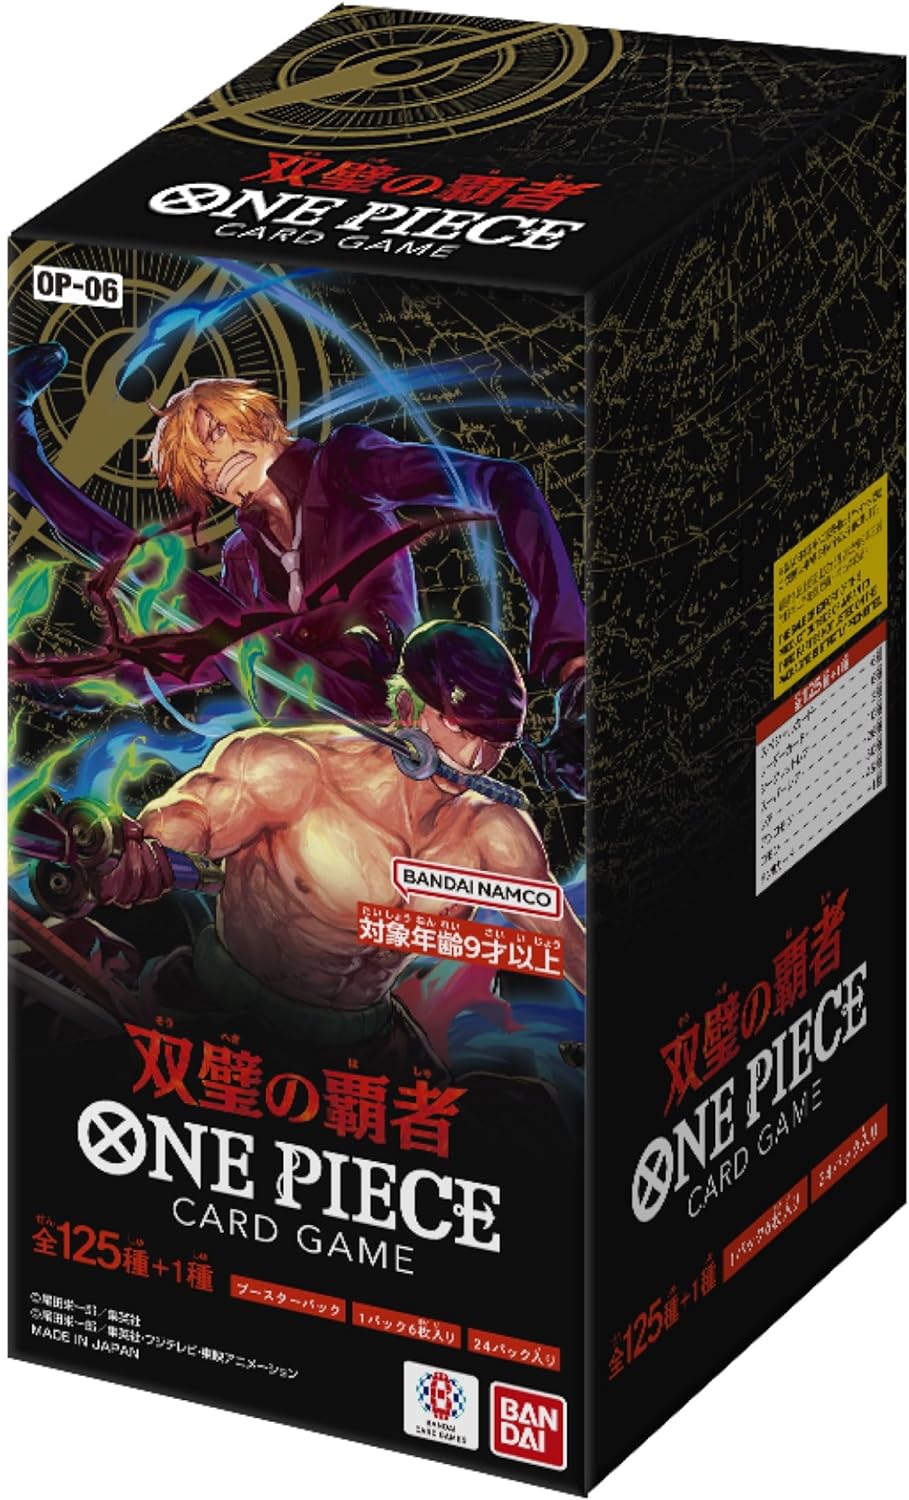 One Piece Card Game Wings of The Captain [OP-06] (Box)